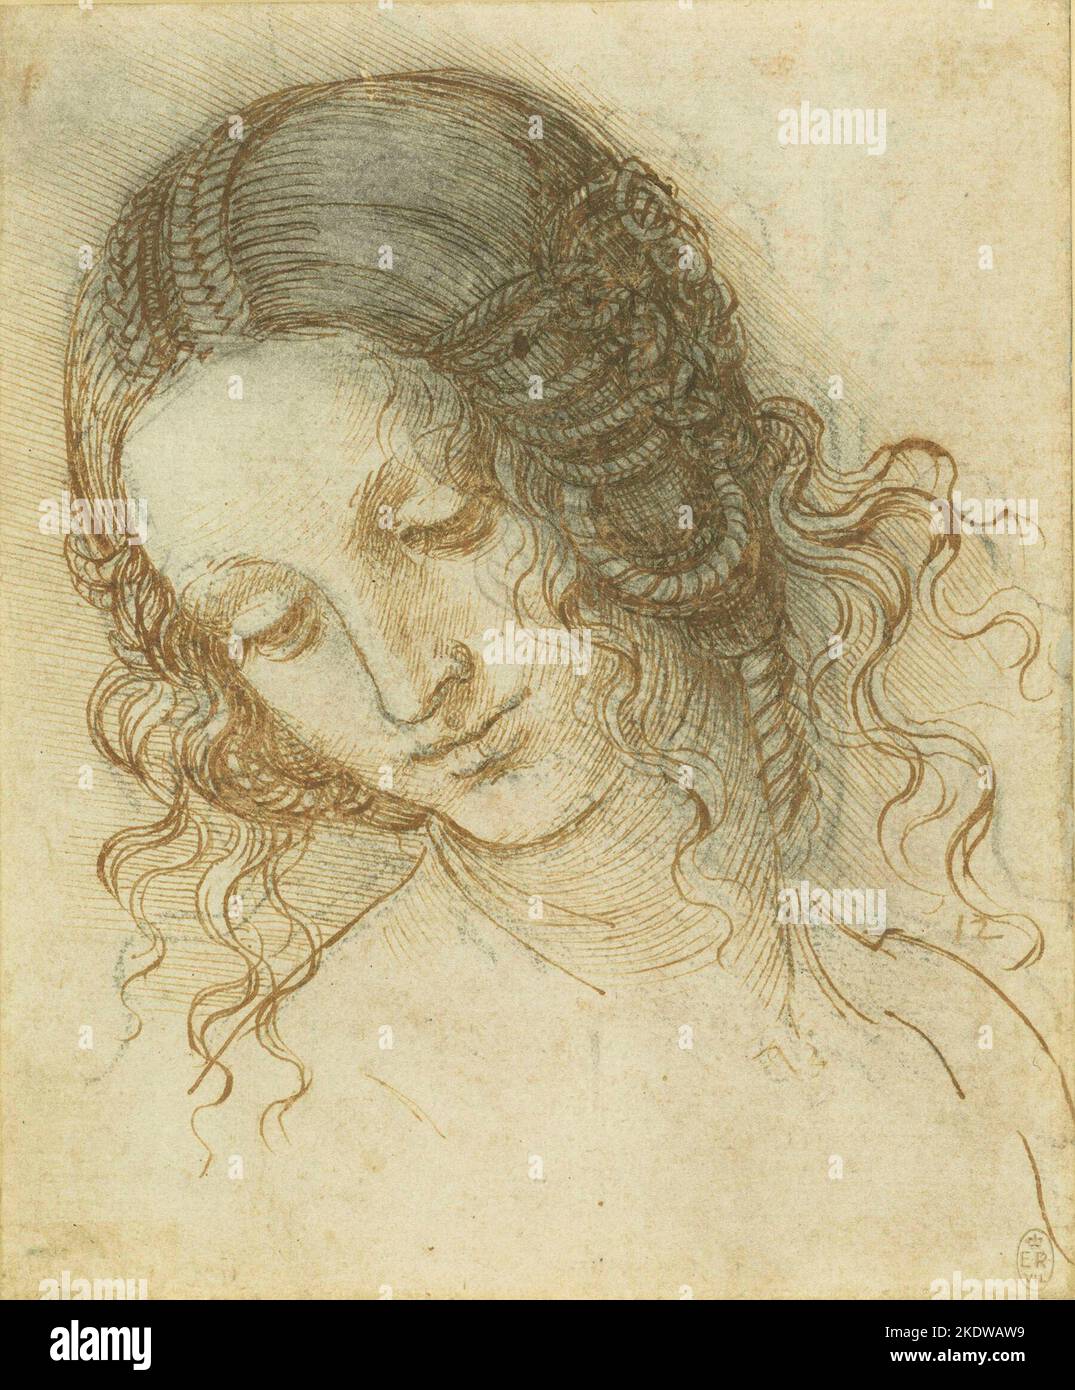 Head of Leda. Date/Period: Ca.1504 - ca.1506. Drawing. Pen and ink over black chalk on paper. Height: 177 mm (6.96 in); Width: 147 mm (5.78 in). Title: The head of Leda  Creator: Leonardo da Vinci  Date: c.1505-8 Dimensions: 17.7 x 14.7 cm (sheet of paper) Medium: Black chalk, pen and ink Location: Royal Collection Stock Photo